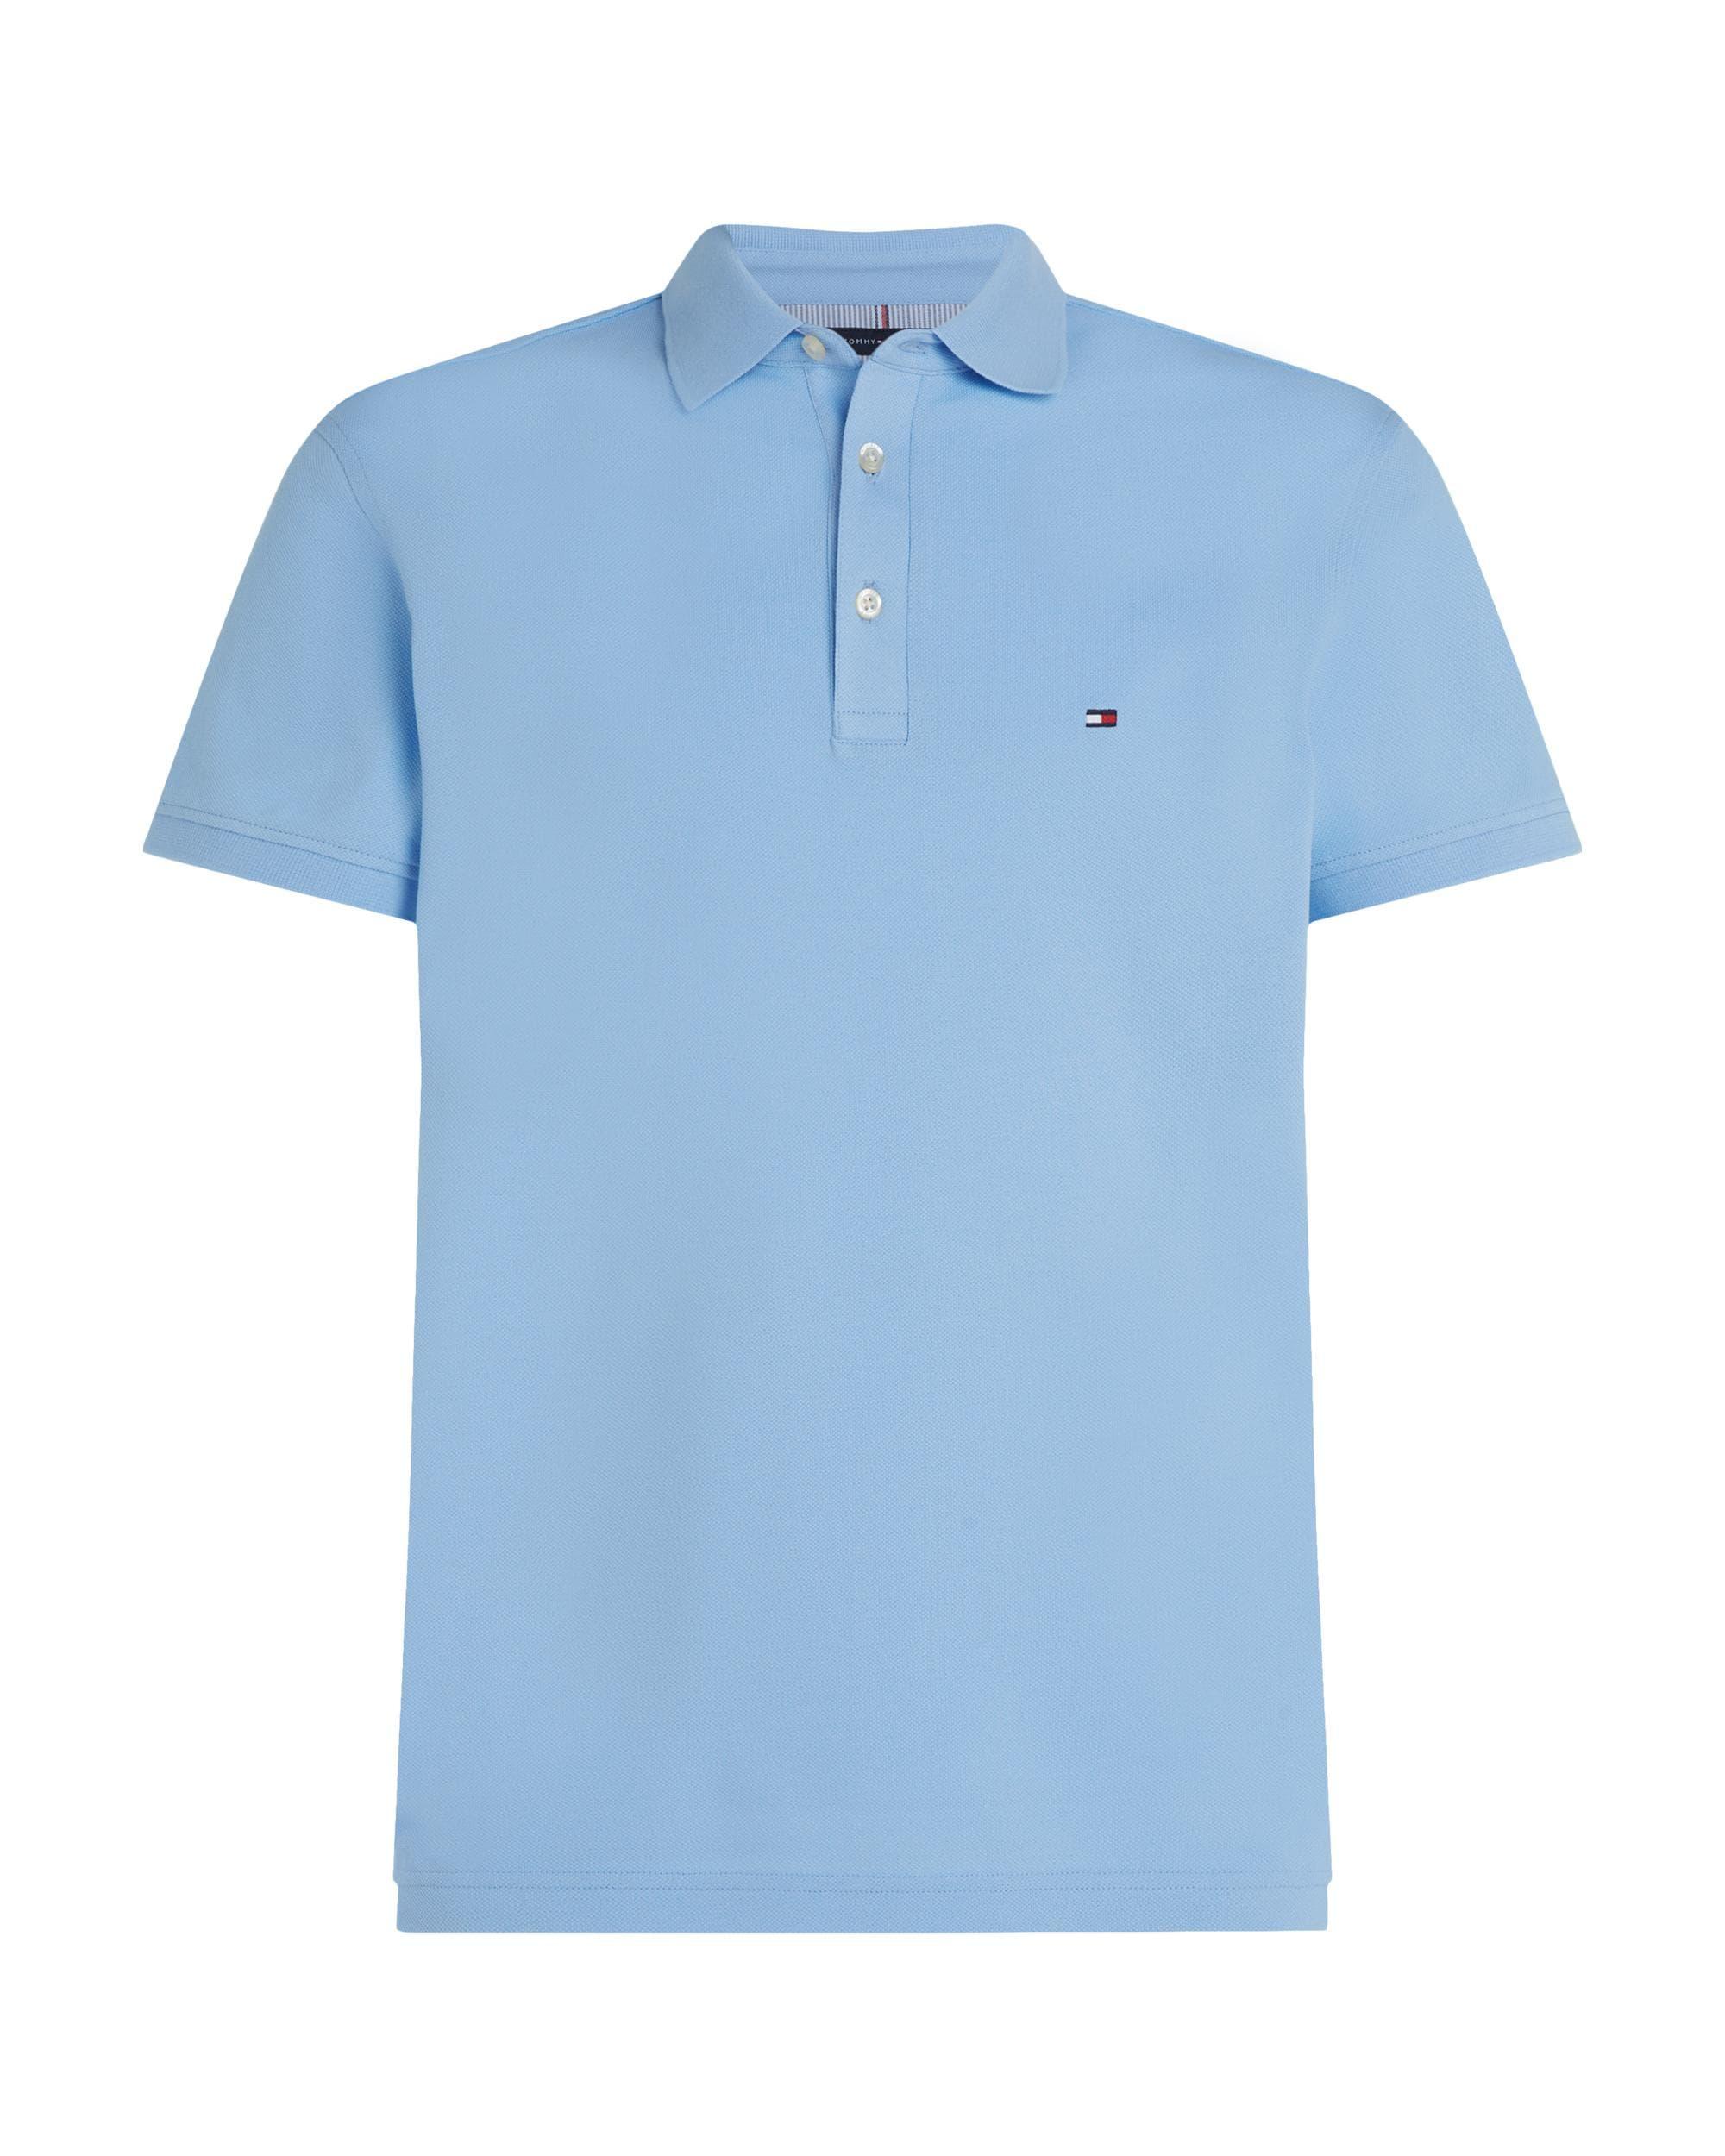 Tommy Hilfiger Core 1985 Slim Polo Shirt in Blue for Men